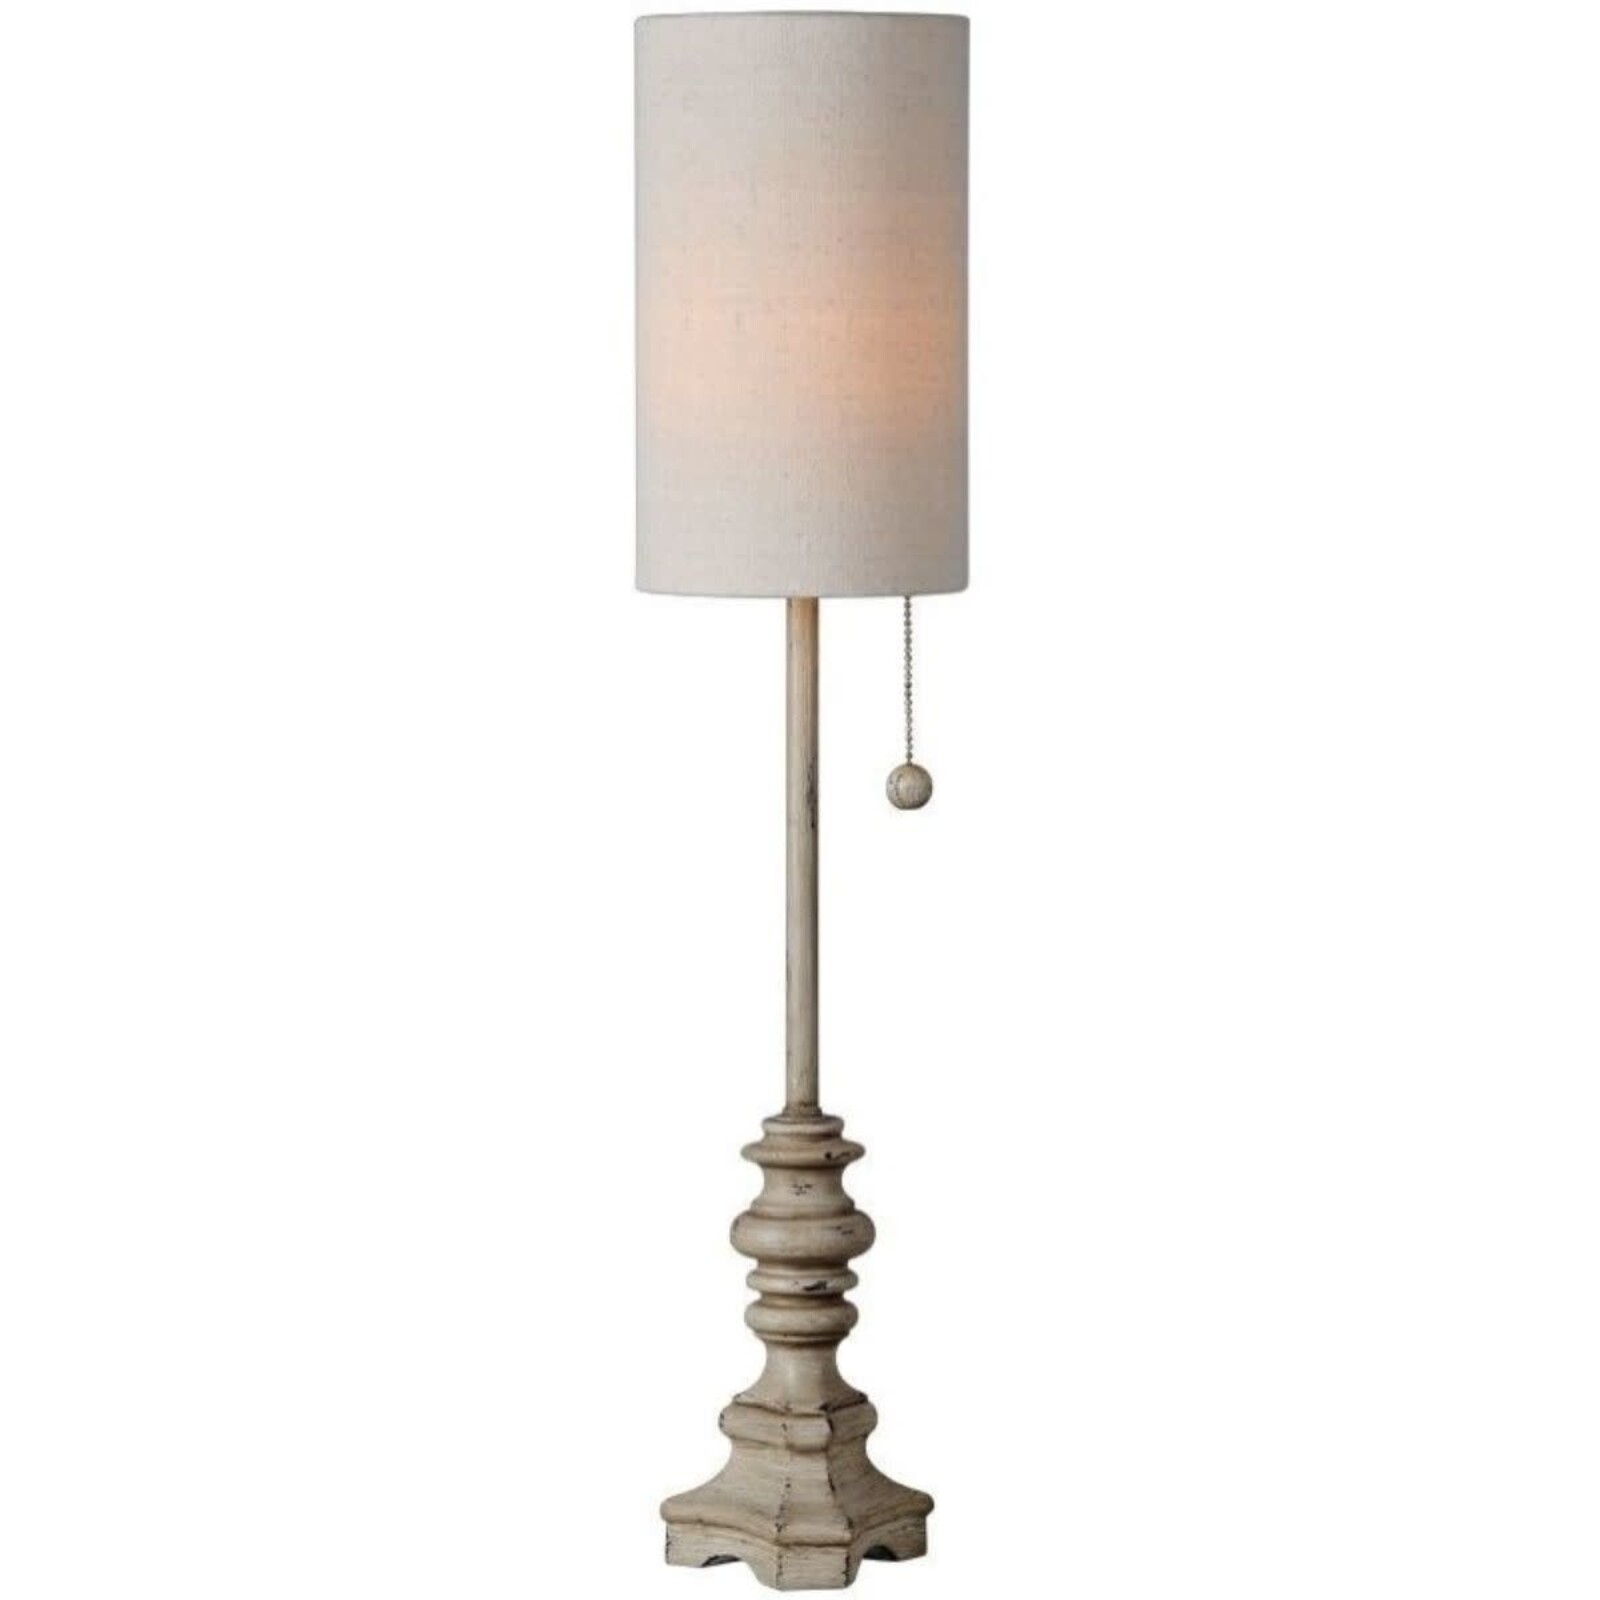 Forty West Mabry Buffet Lamp   74023 loading=